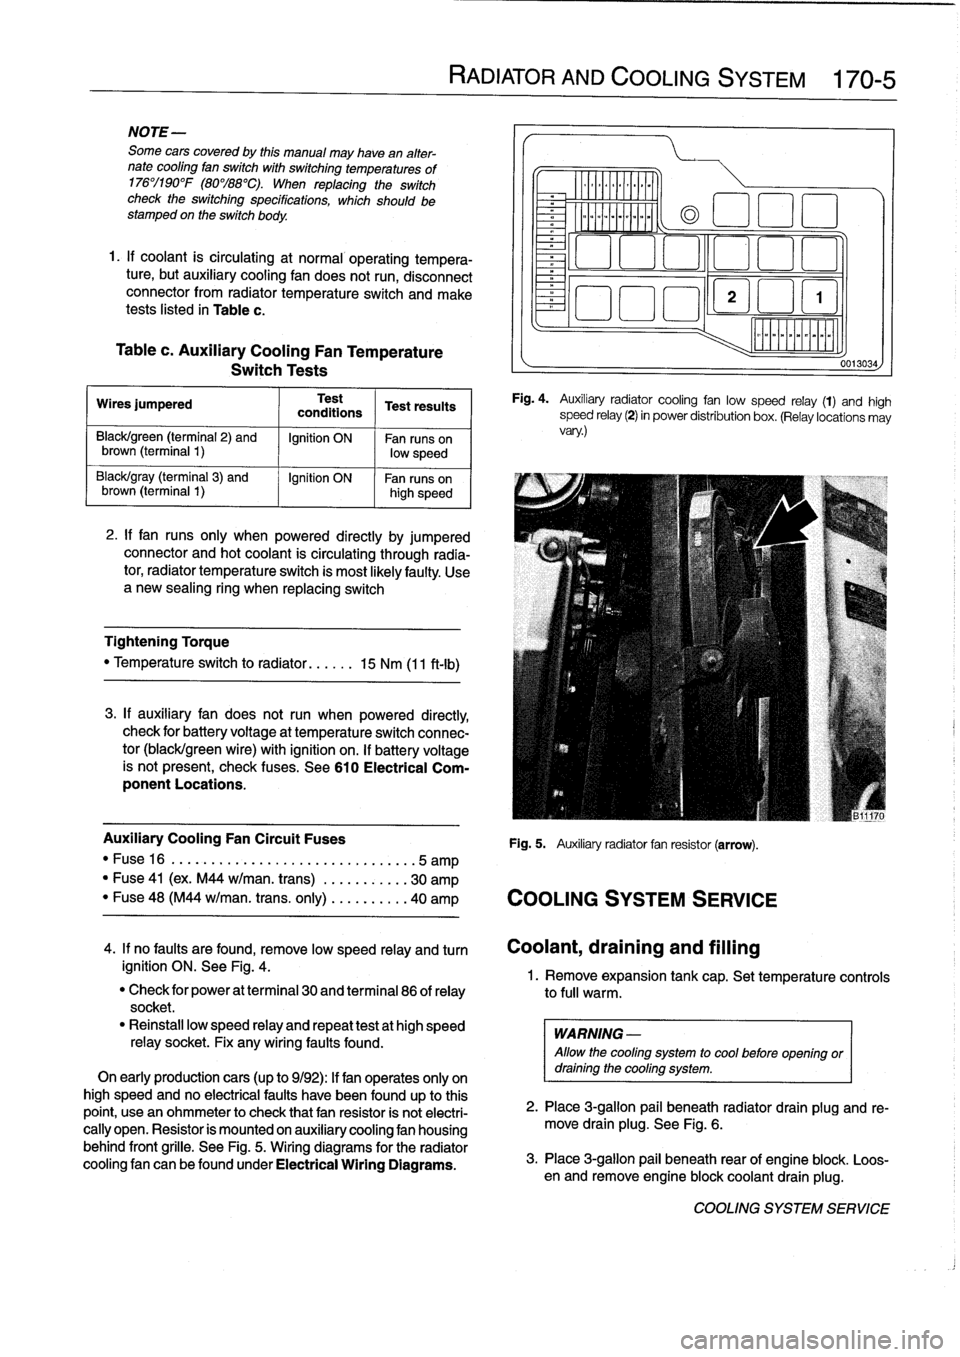 BMW 325i 1998 E36 Workshop Manual 
NOTE-

Some
cars
covered
by
this
manual
may
have
an
alter-
nate
cooling
fan
switchwith
switching
temperatures
of
176%190W
(80%88°C)
.
When
replacing
the
switch
check
theswitching
specifications,
whi